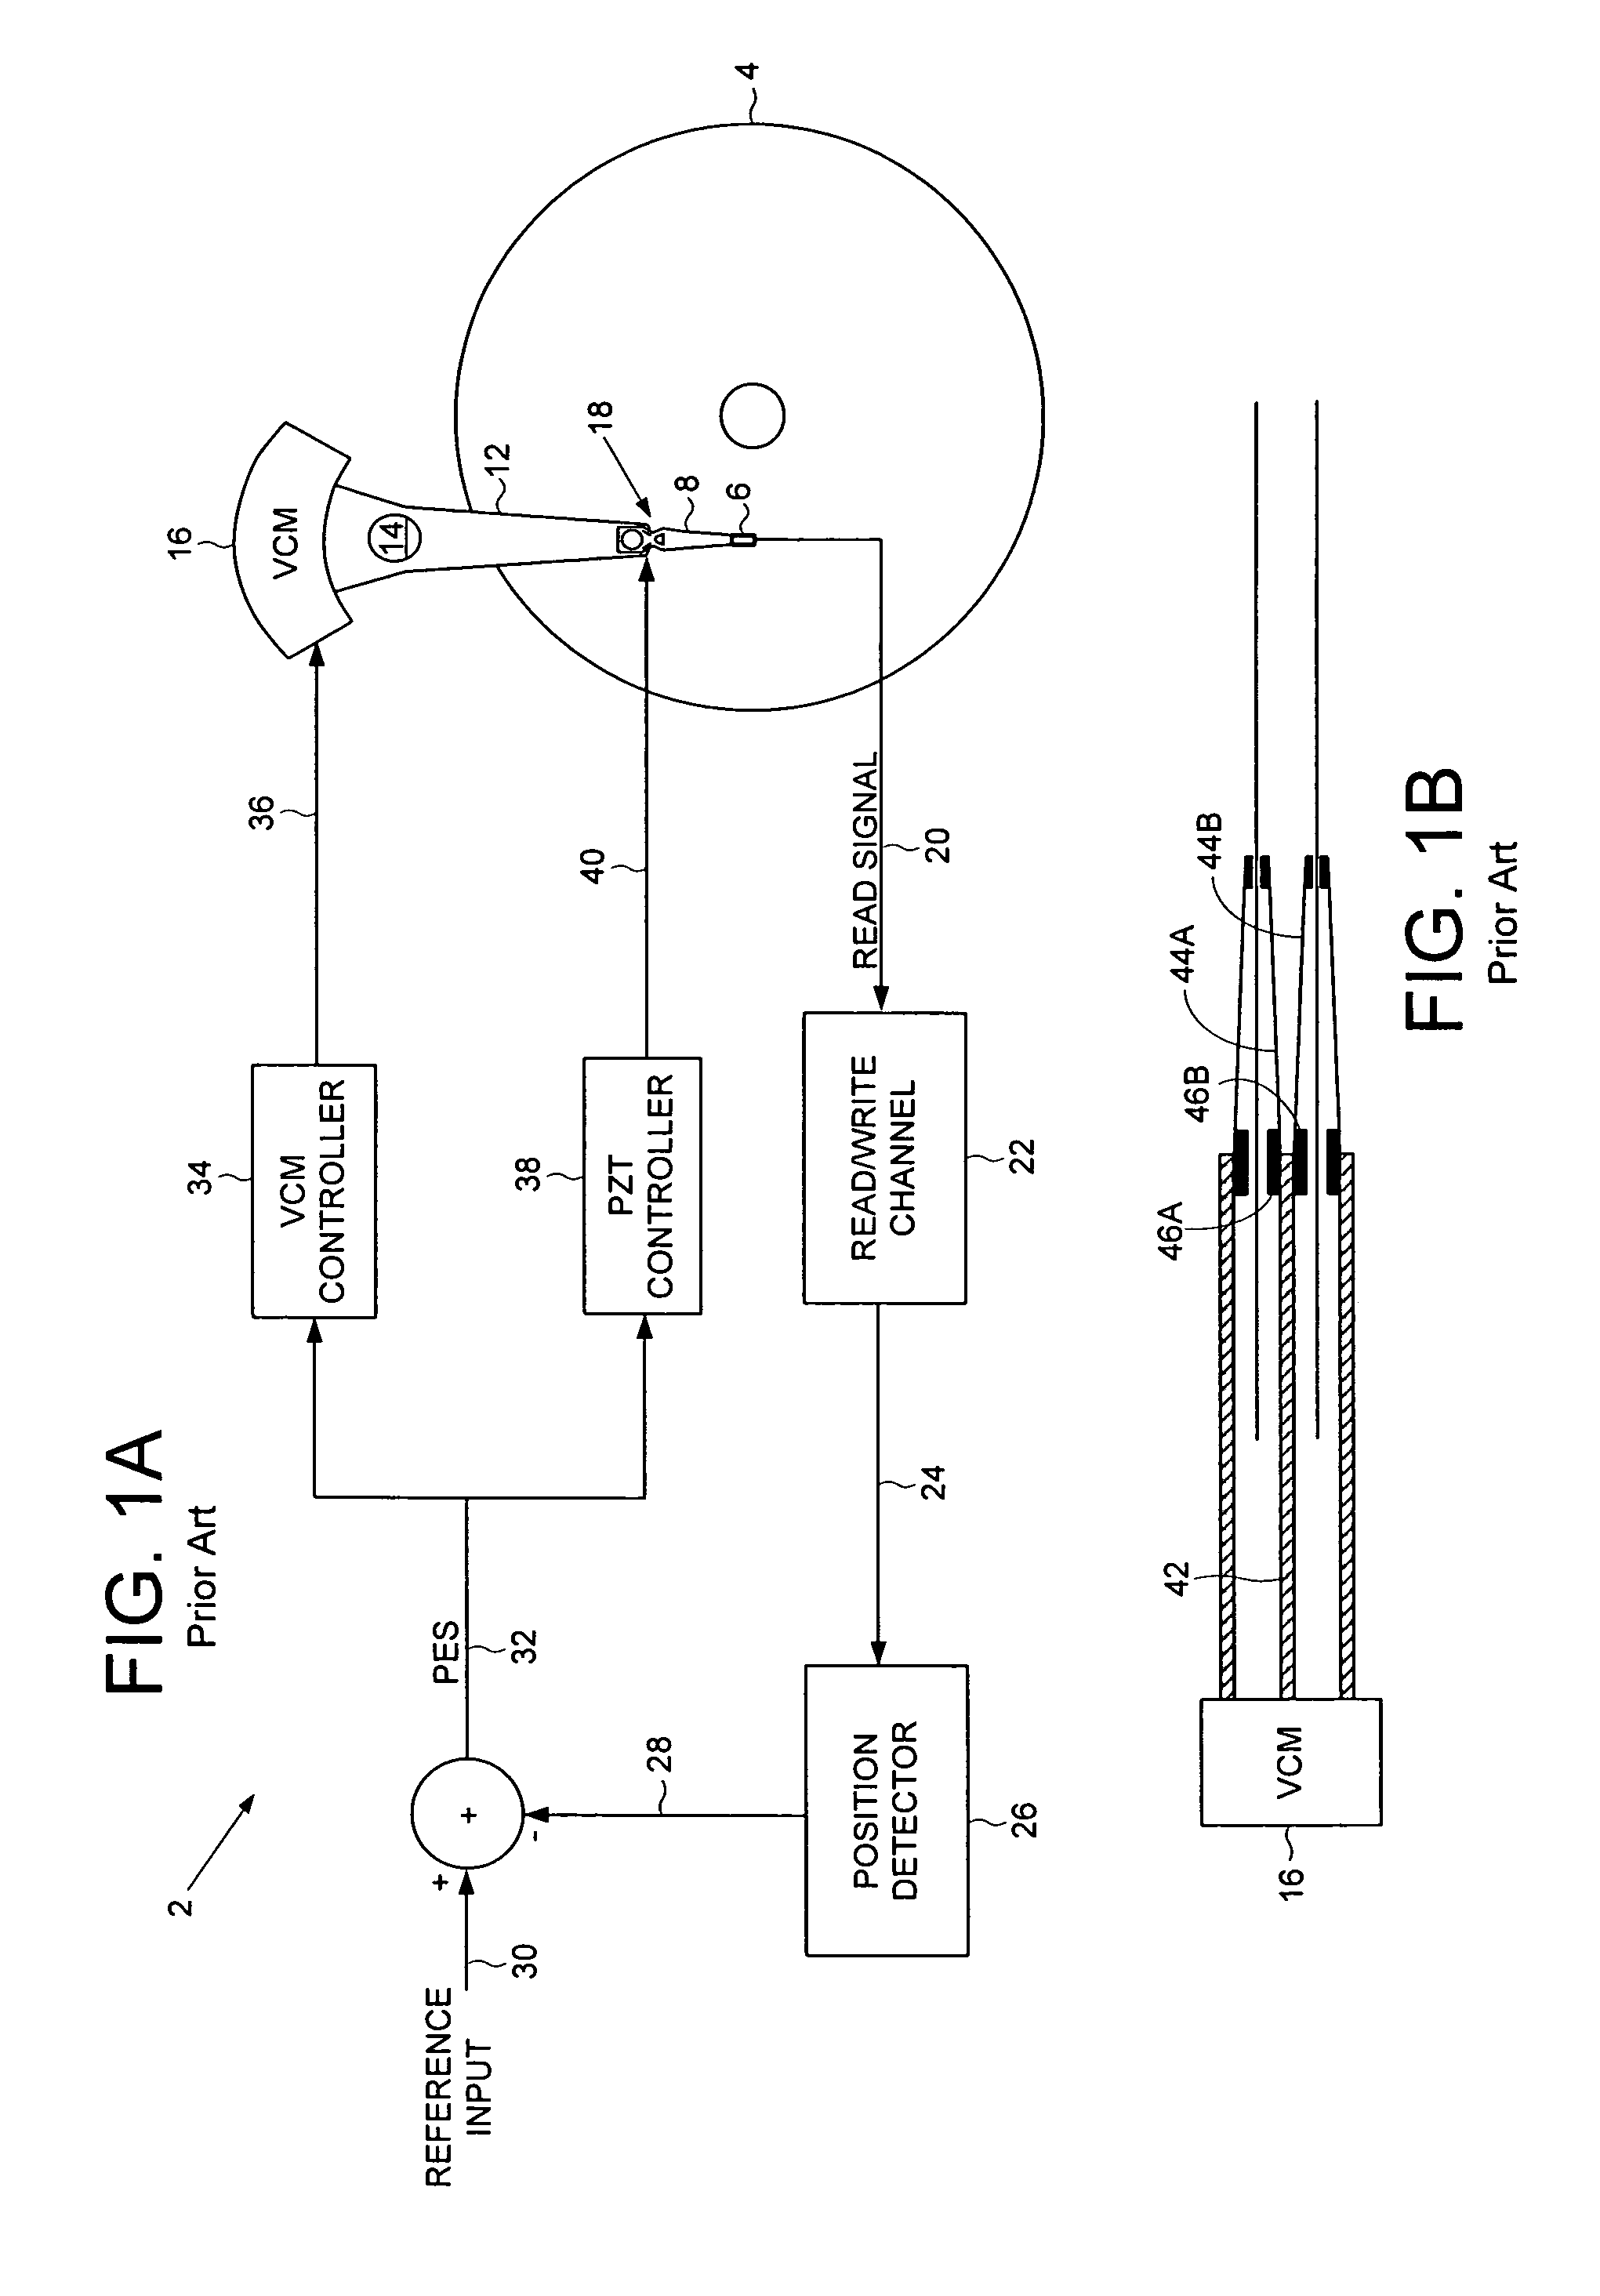 Disk drive attenuating excitation of arm vibration mode by simultaneously driving secondary actuator for non-active head